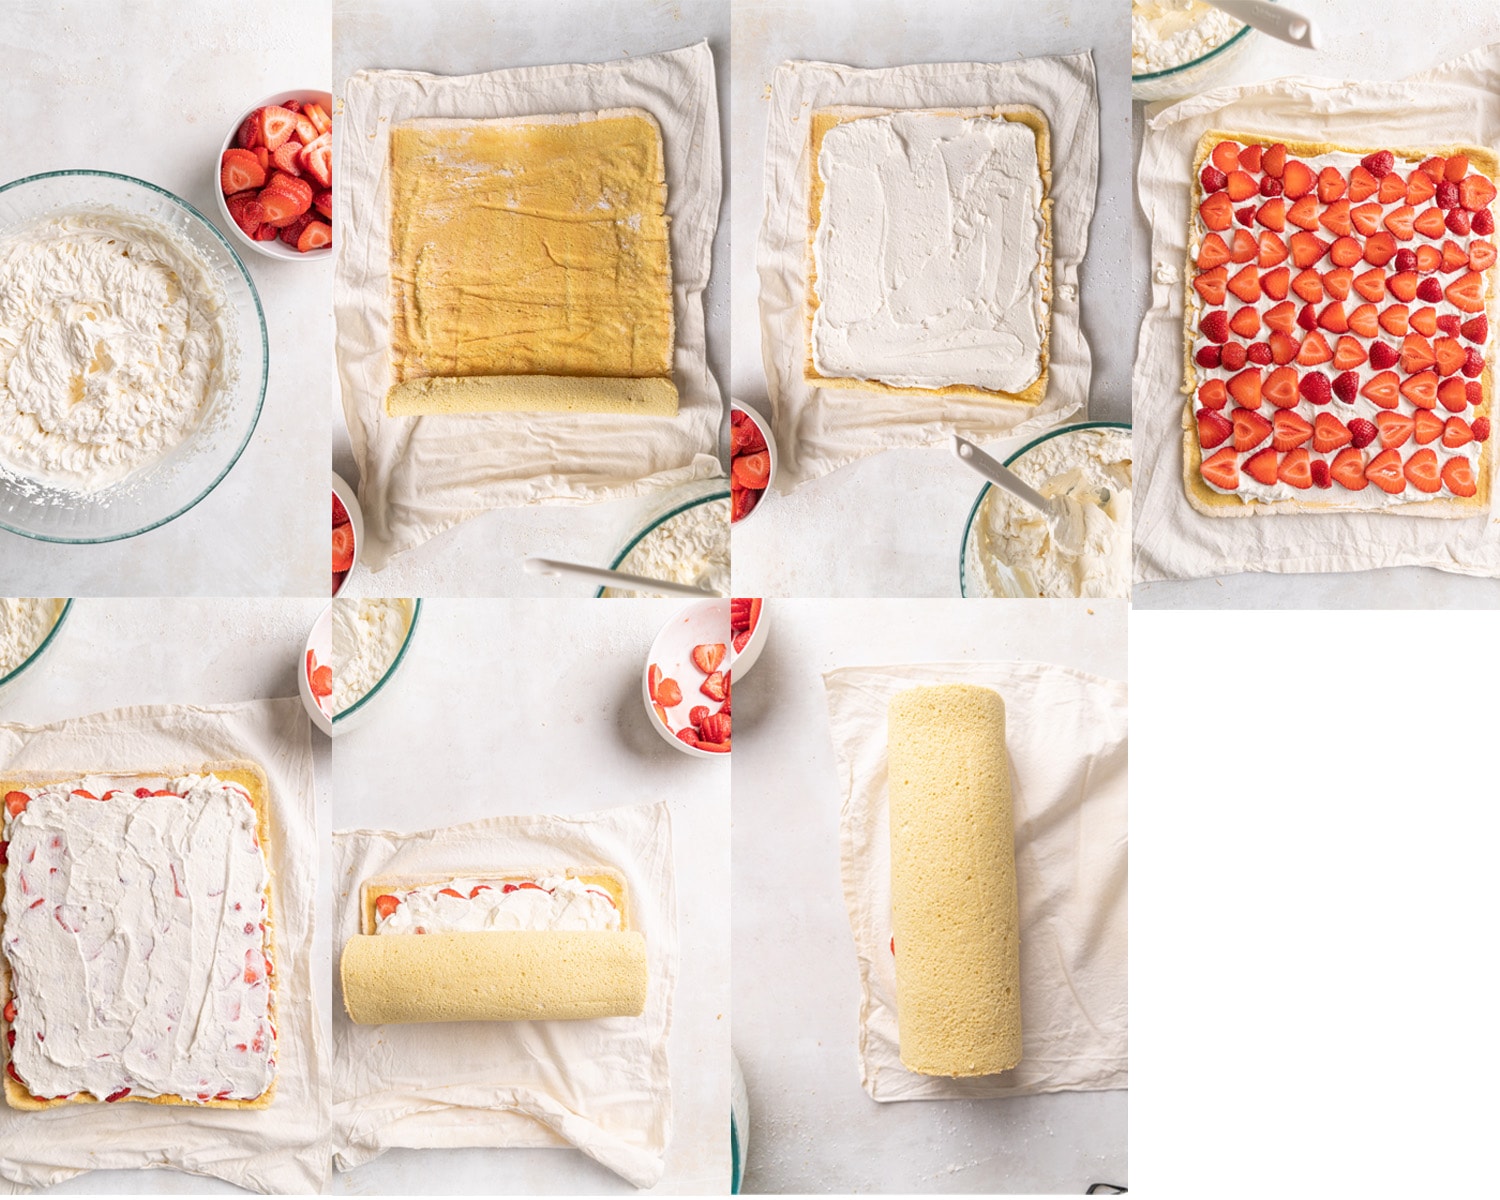 assembling and filling a roulade with strawberries and whipped cream. 